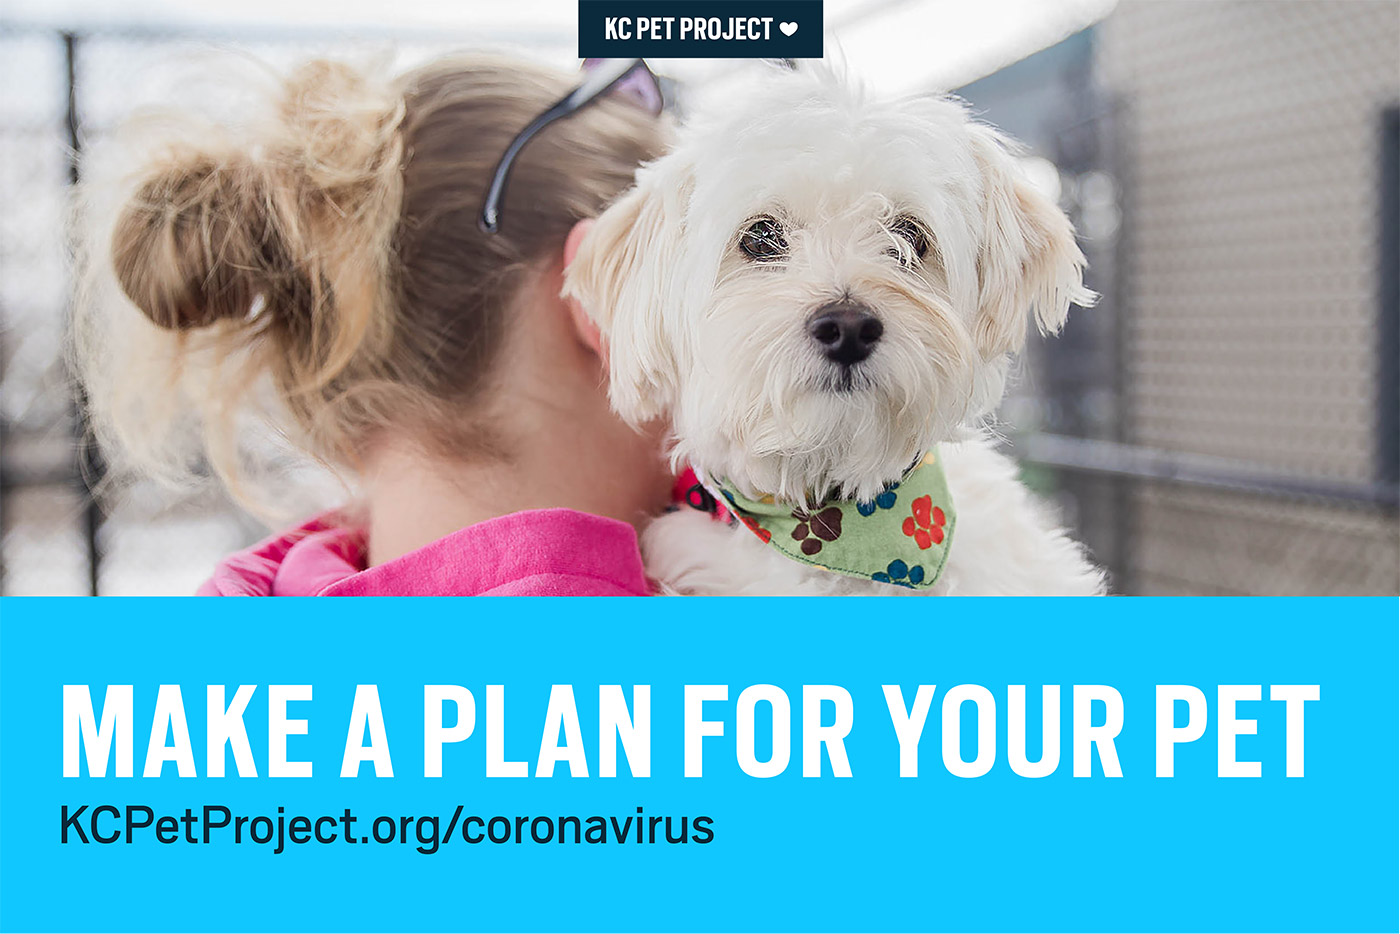 Make a plan for your pet if you get sick from coronavirus